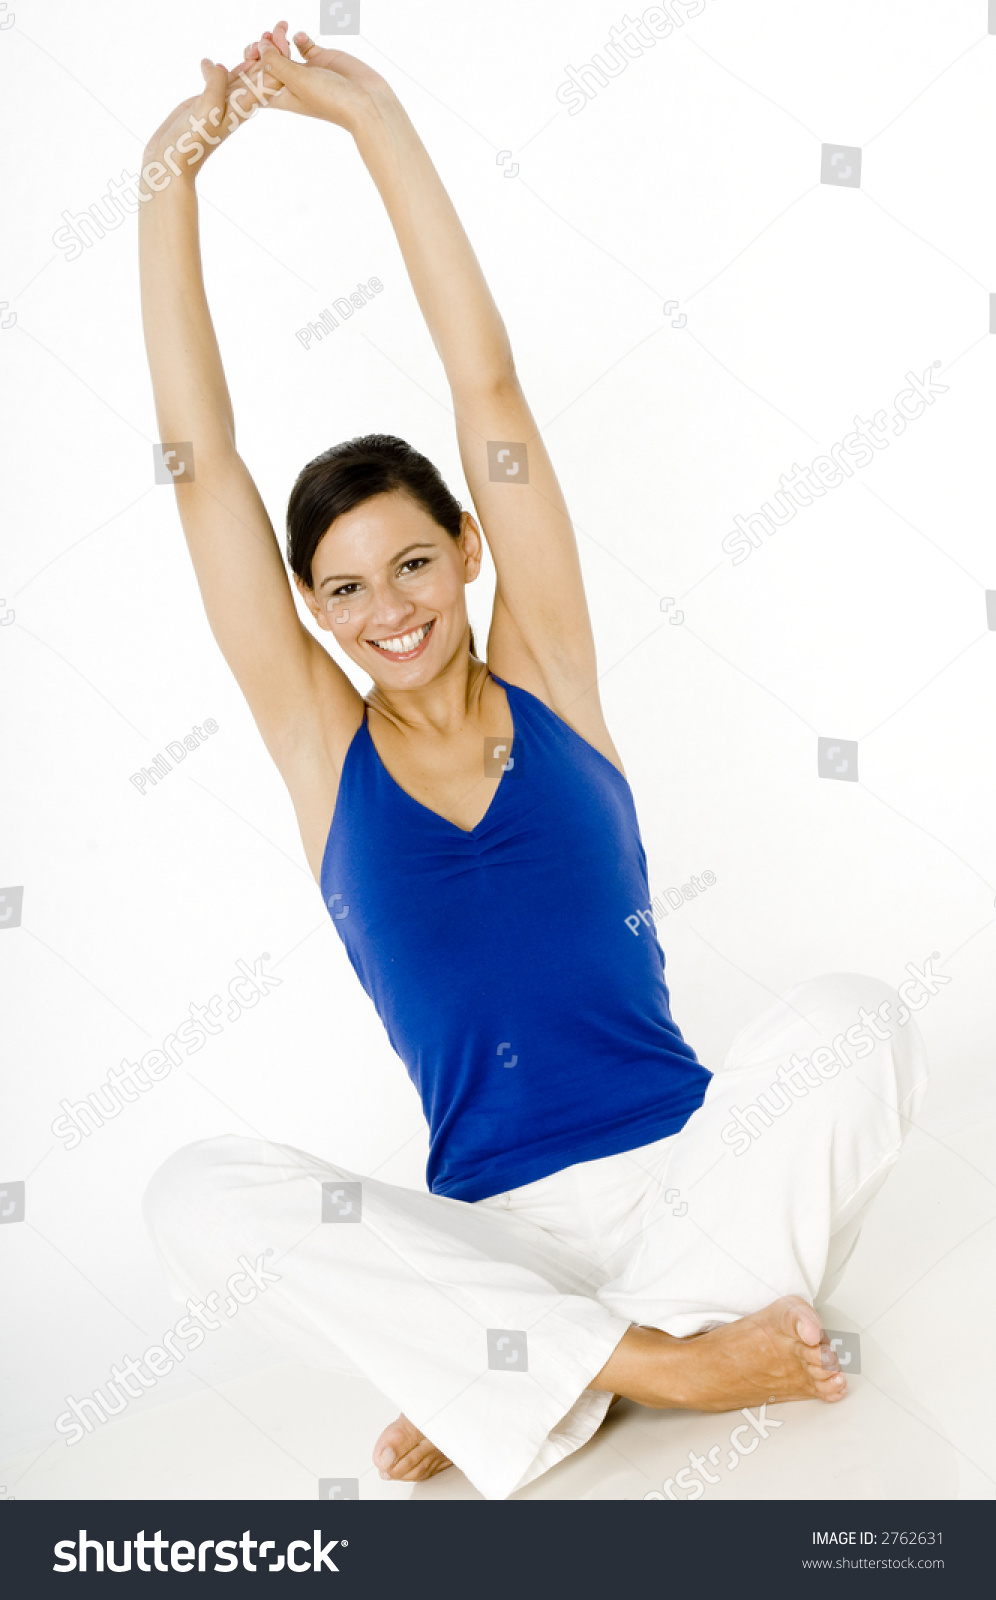 A Young Woman Sitting On The Floor Stretching Her Arms Upwards Stock ...